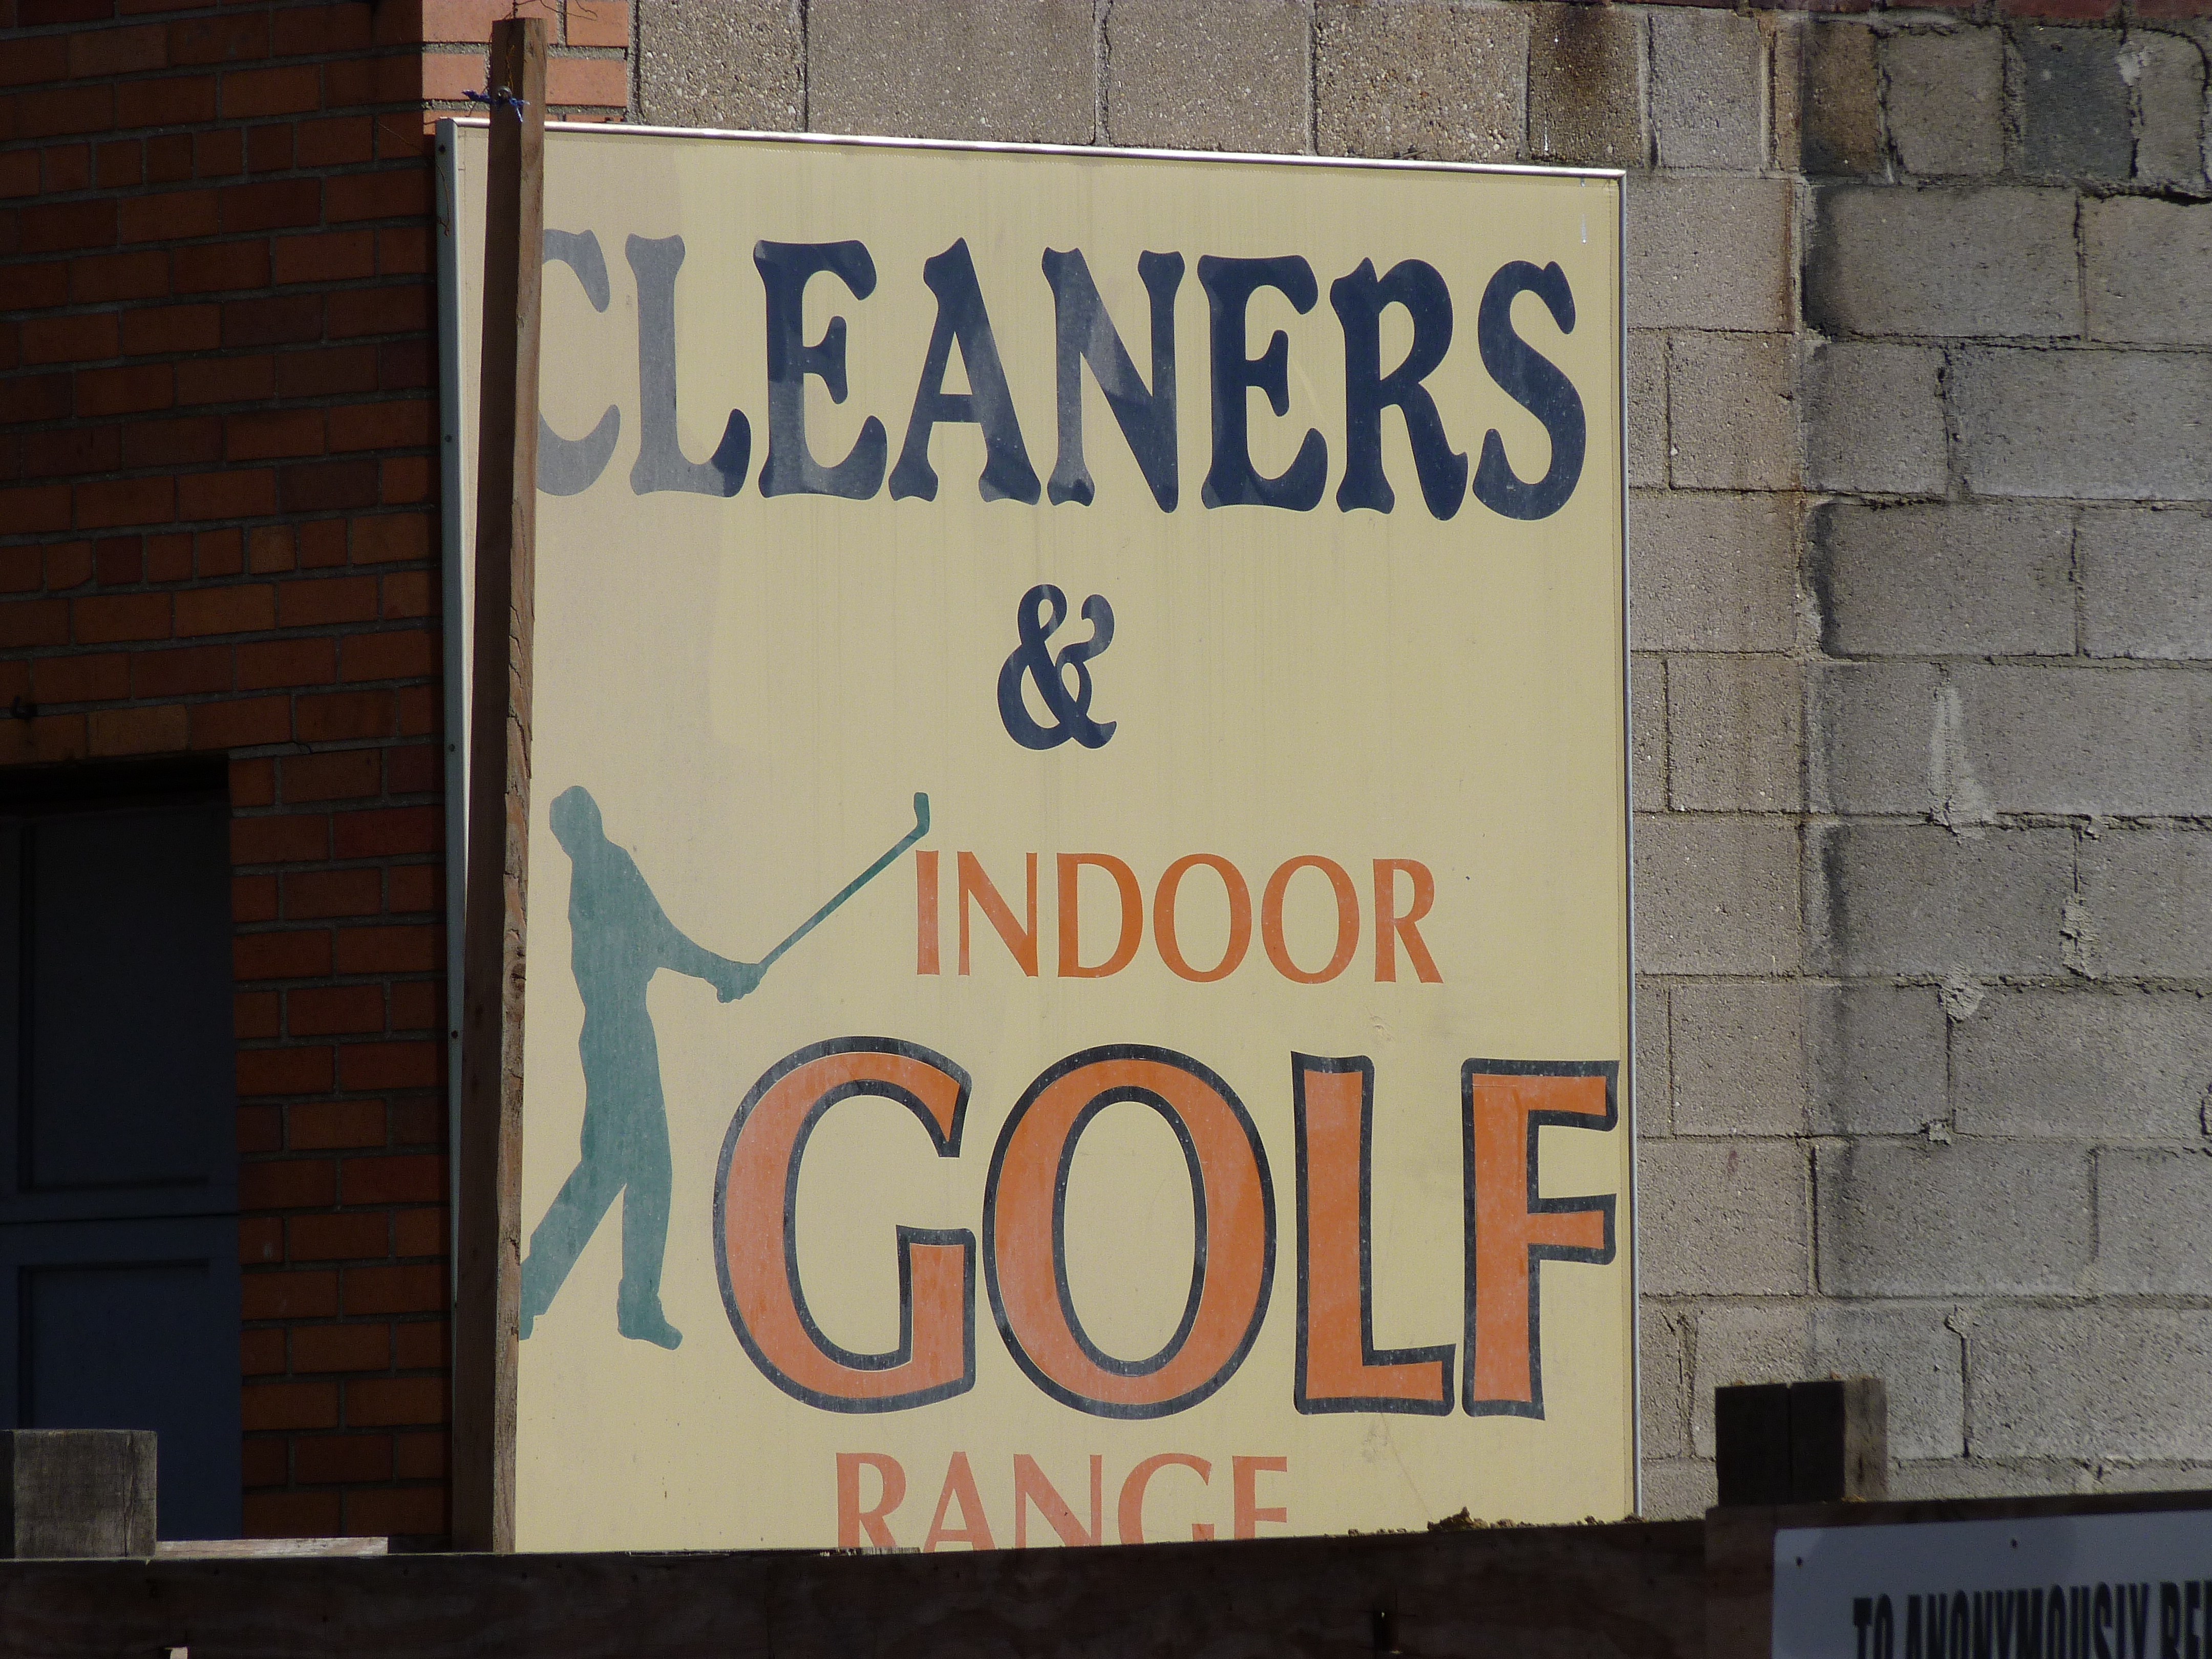 The People of Court Square have Cleaners & Indoor Golf, and soon M. Wells Steakhouse